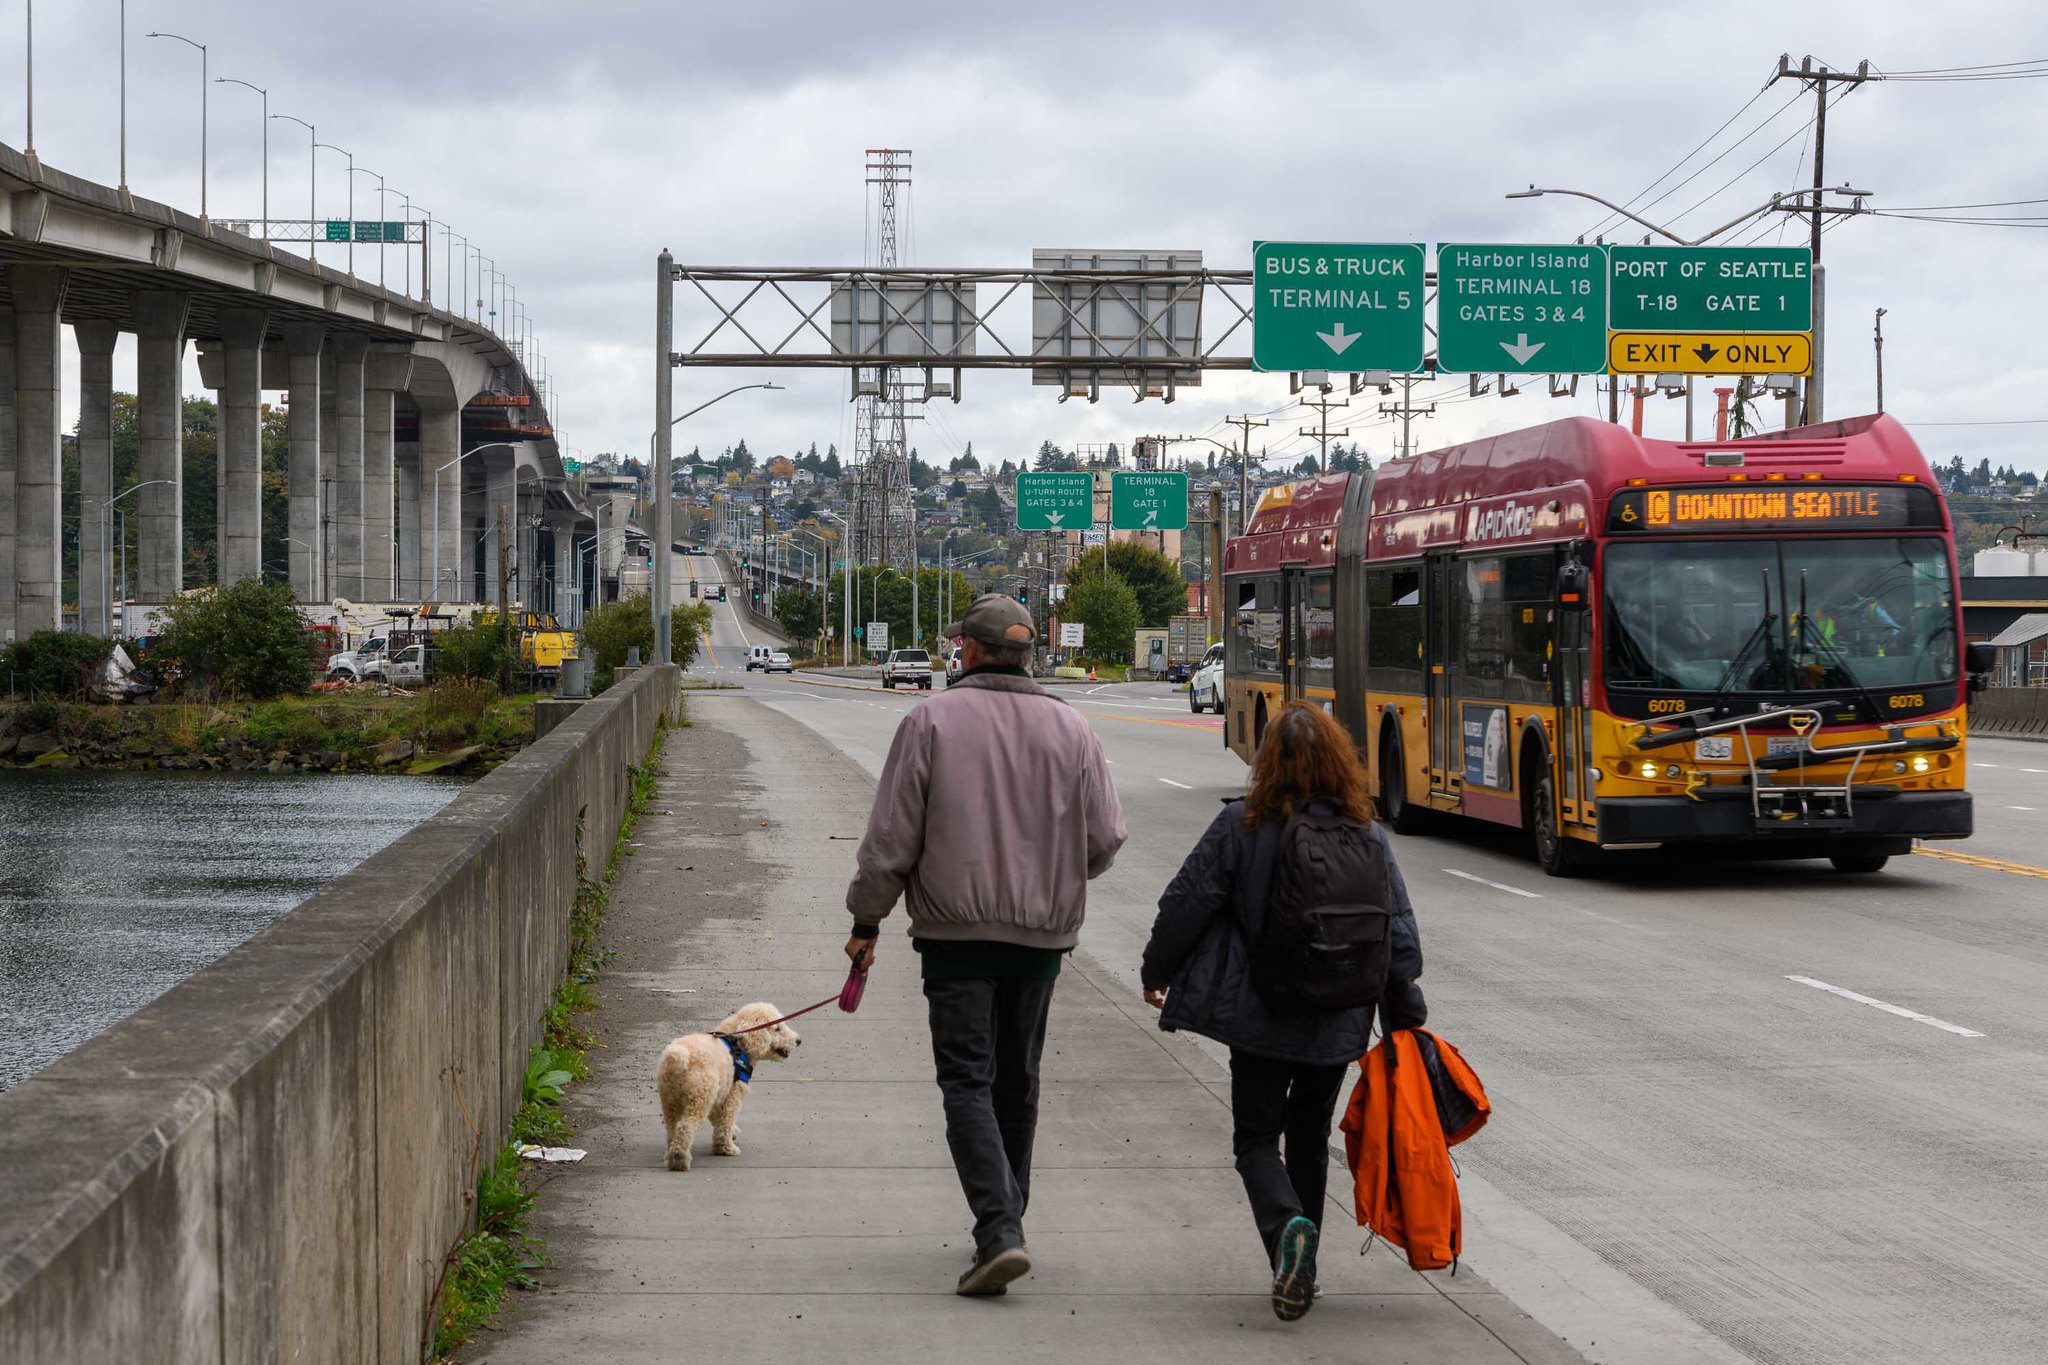 Two people walk their dog near the West Seattle Bridge, as a King County Metro RapidRide C Line bus heads toward downtown Seattle. The West Seattle High-Rise Bridge is visible in the upper left, with the Duwamish Waterway visible in the lower left, on a cloudy day.